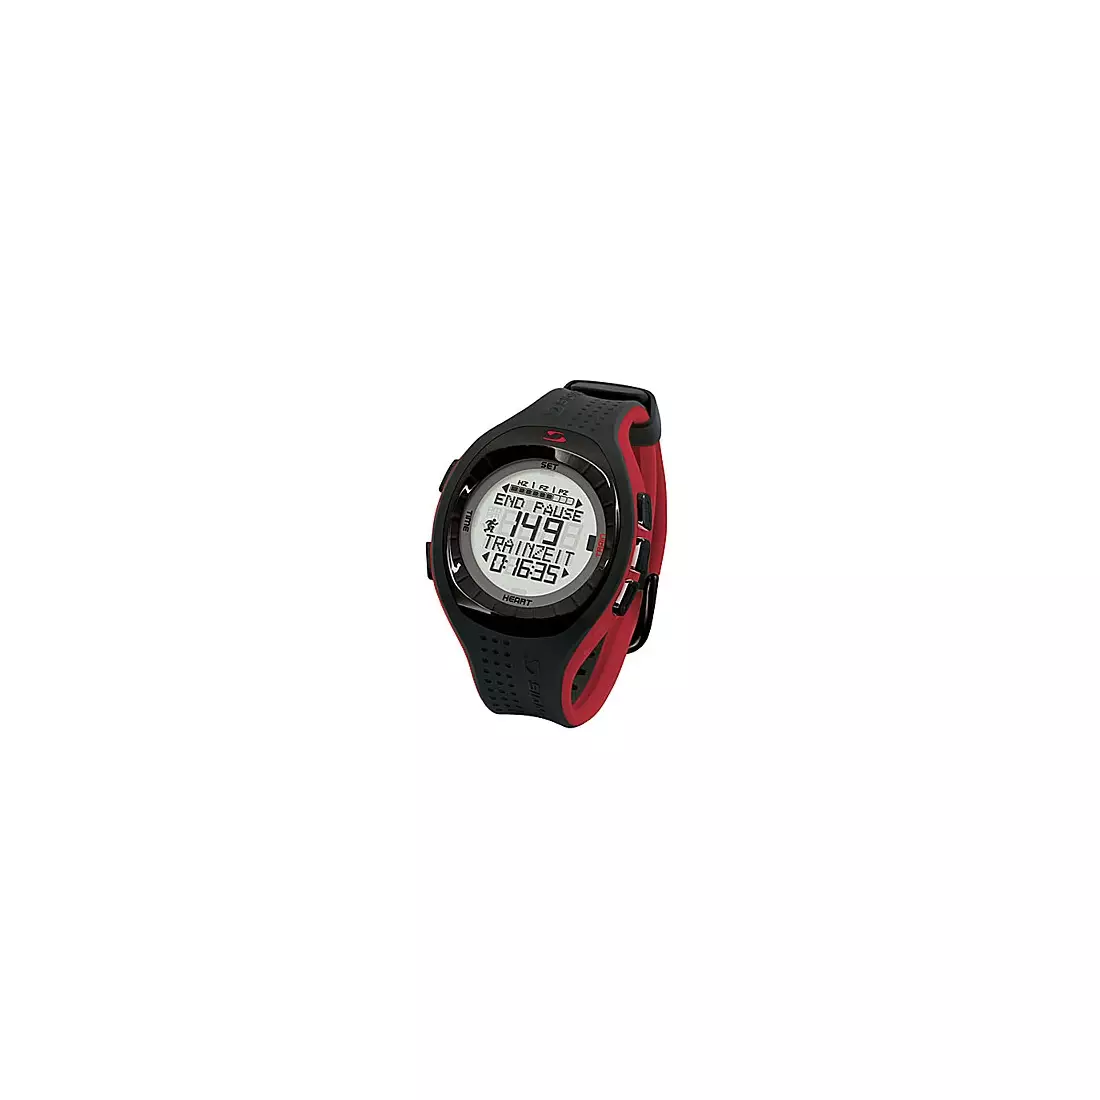 SIGMA SPORT PC 9 MAN heart rate monitor - color: Red